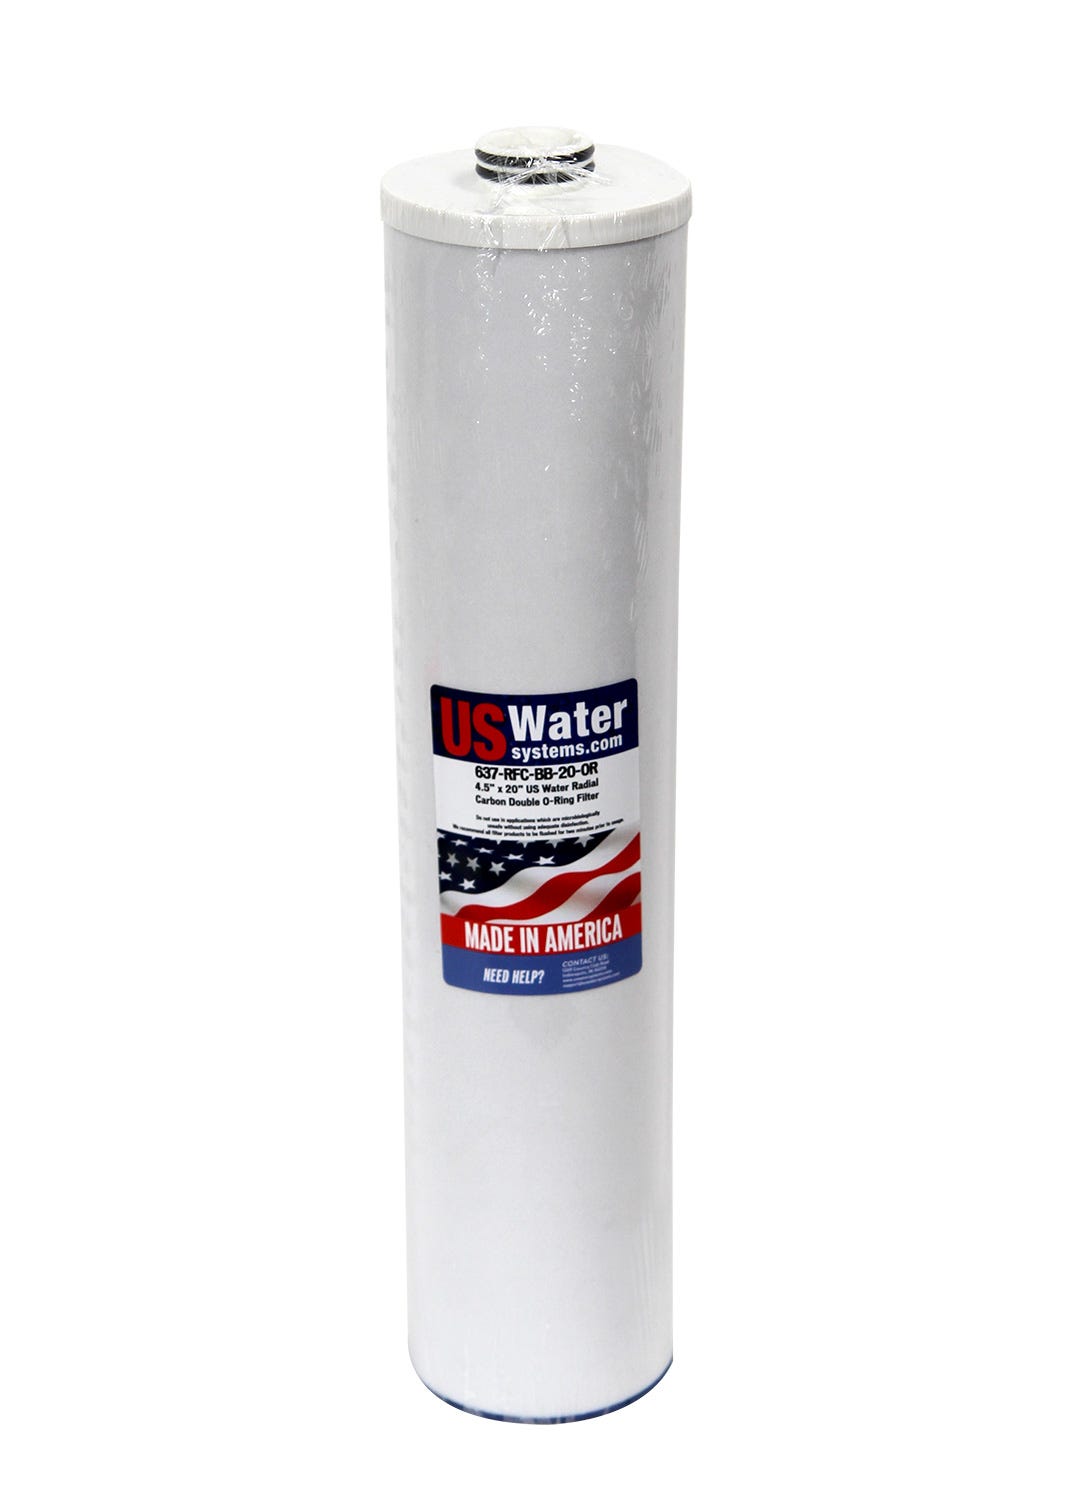 US Water Systems Radial Flow Carbon Filter 4.5" x 20" | Double O-Ring Seal